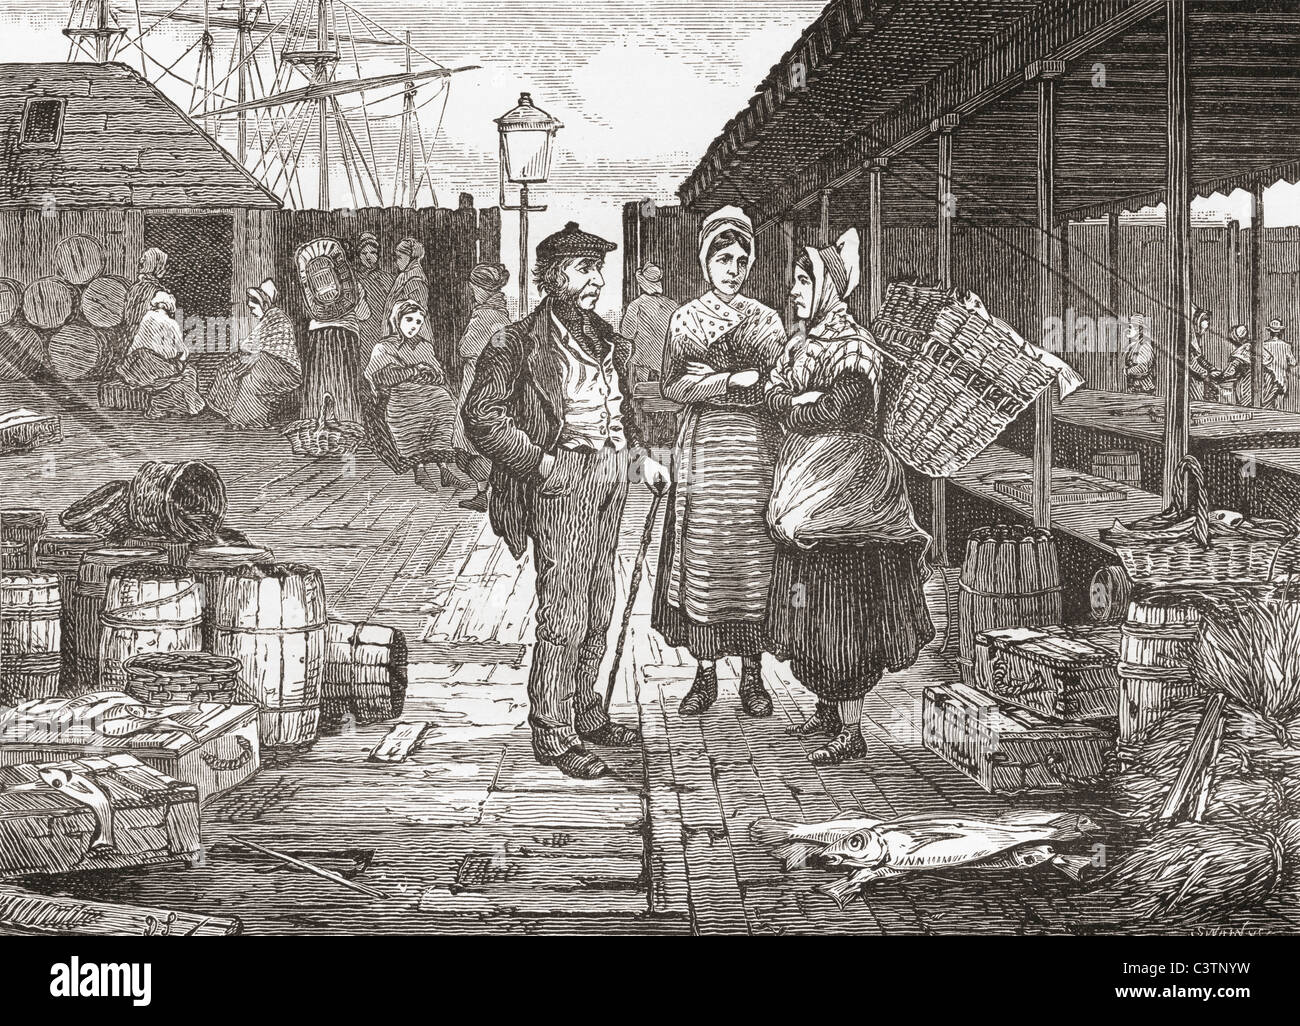 A fishmarket in Aberdeen, Scotland in the late 19th century. Stock Photo